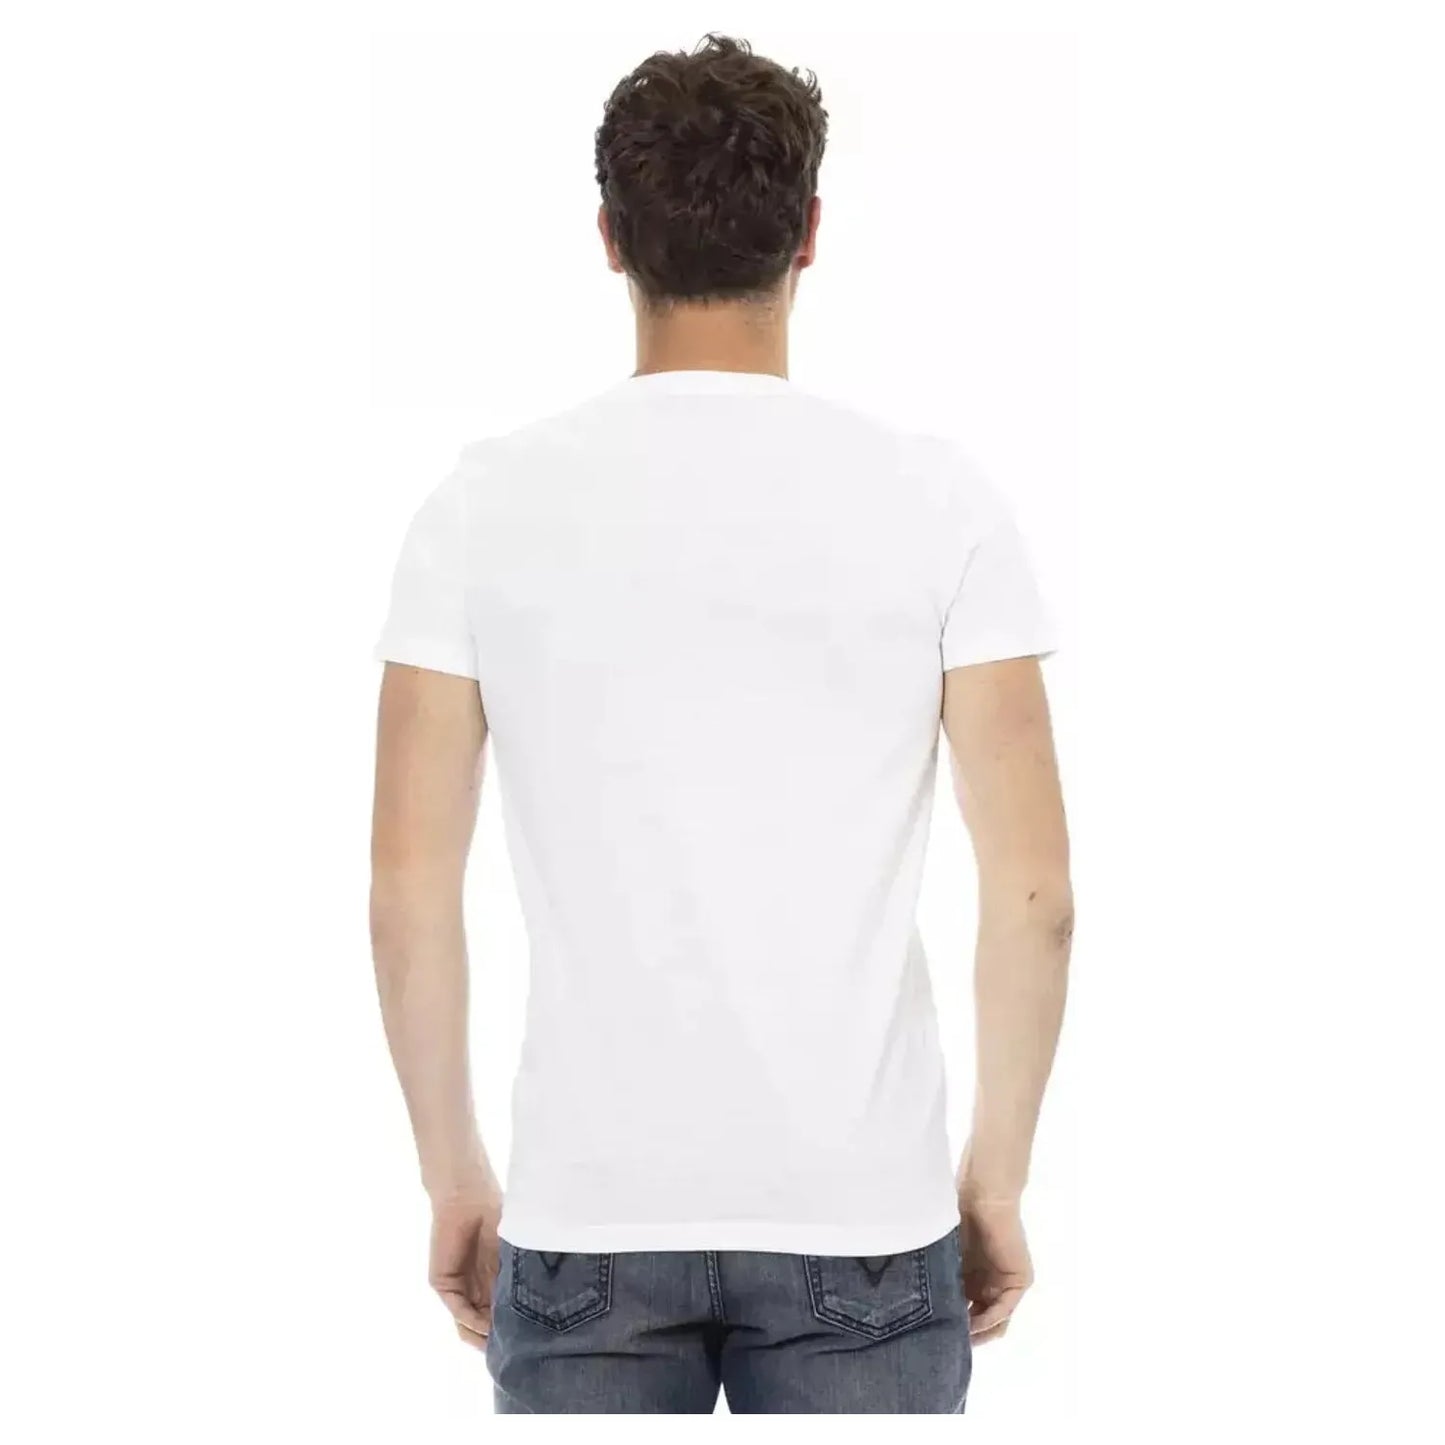 Trussardi Action Sophisticated V-Neck Tee with Artful Print white-cotton-t-shirt-58